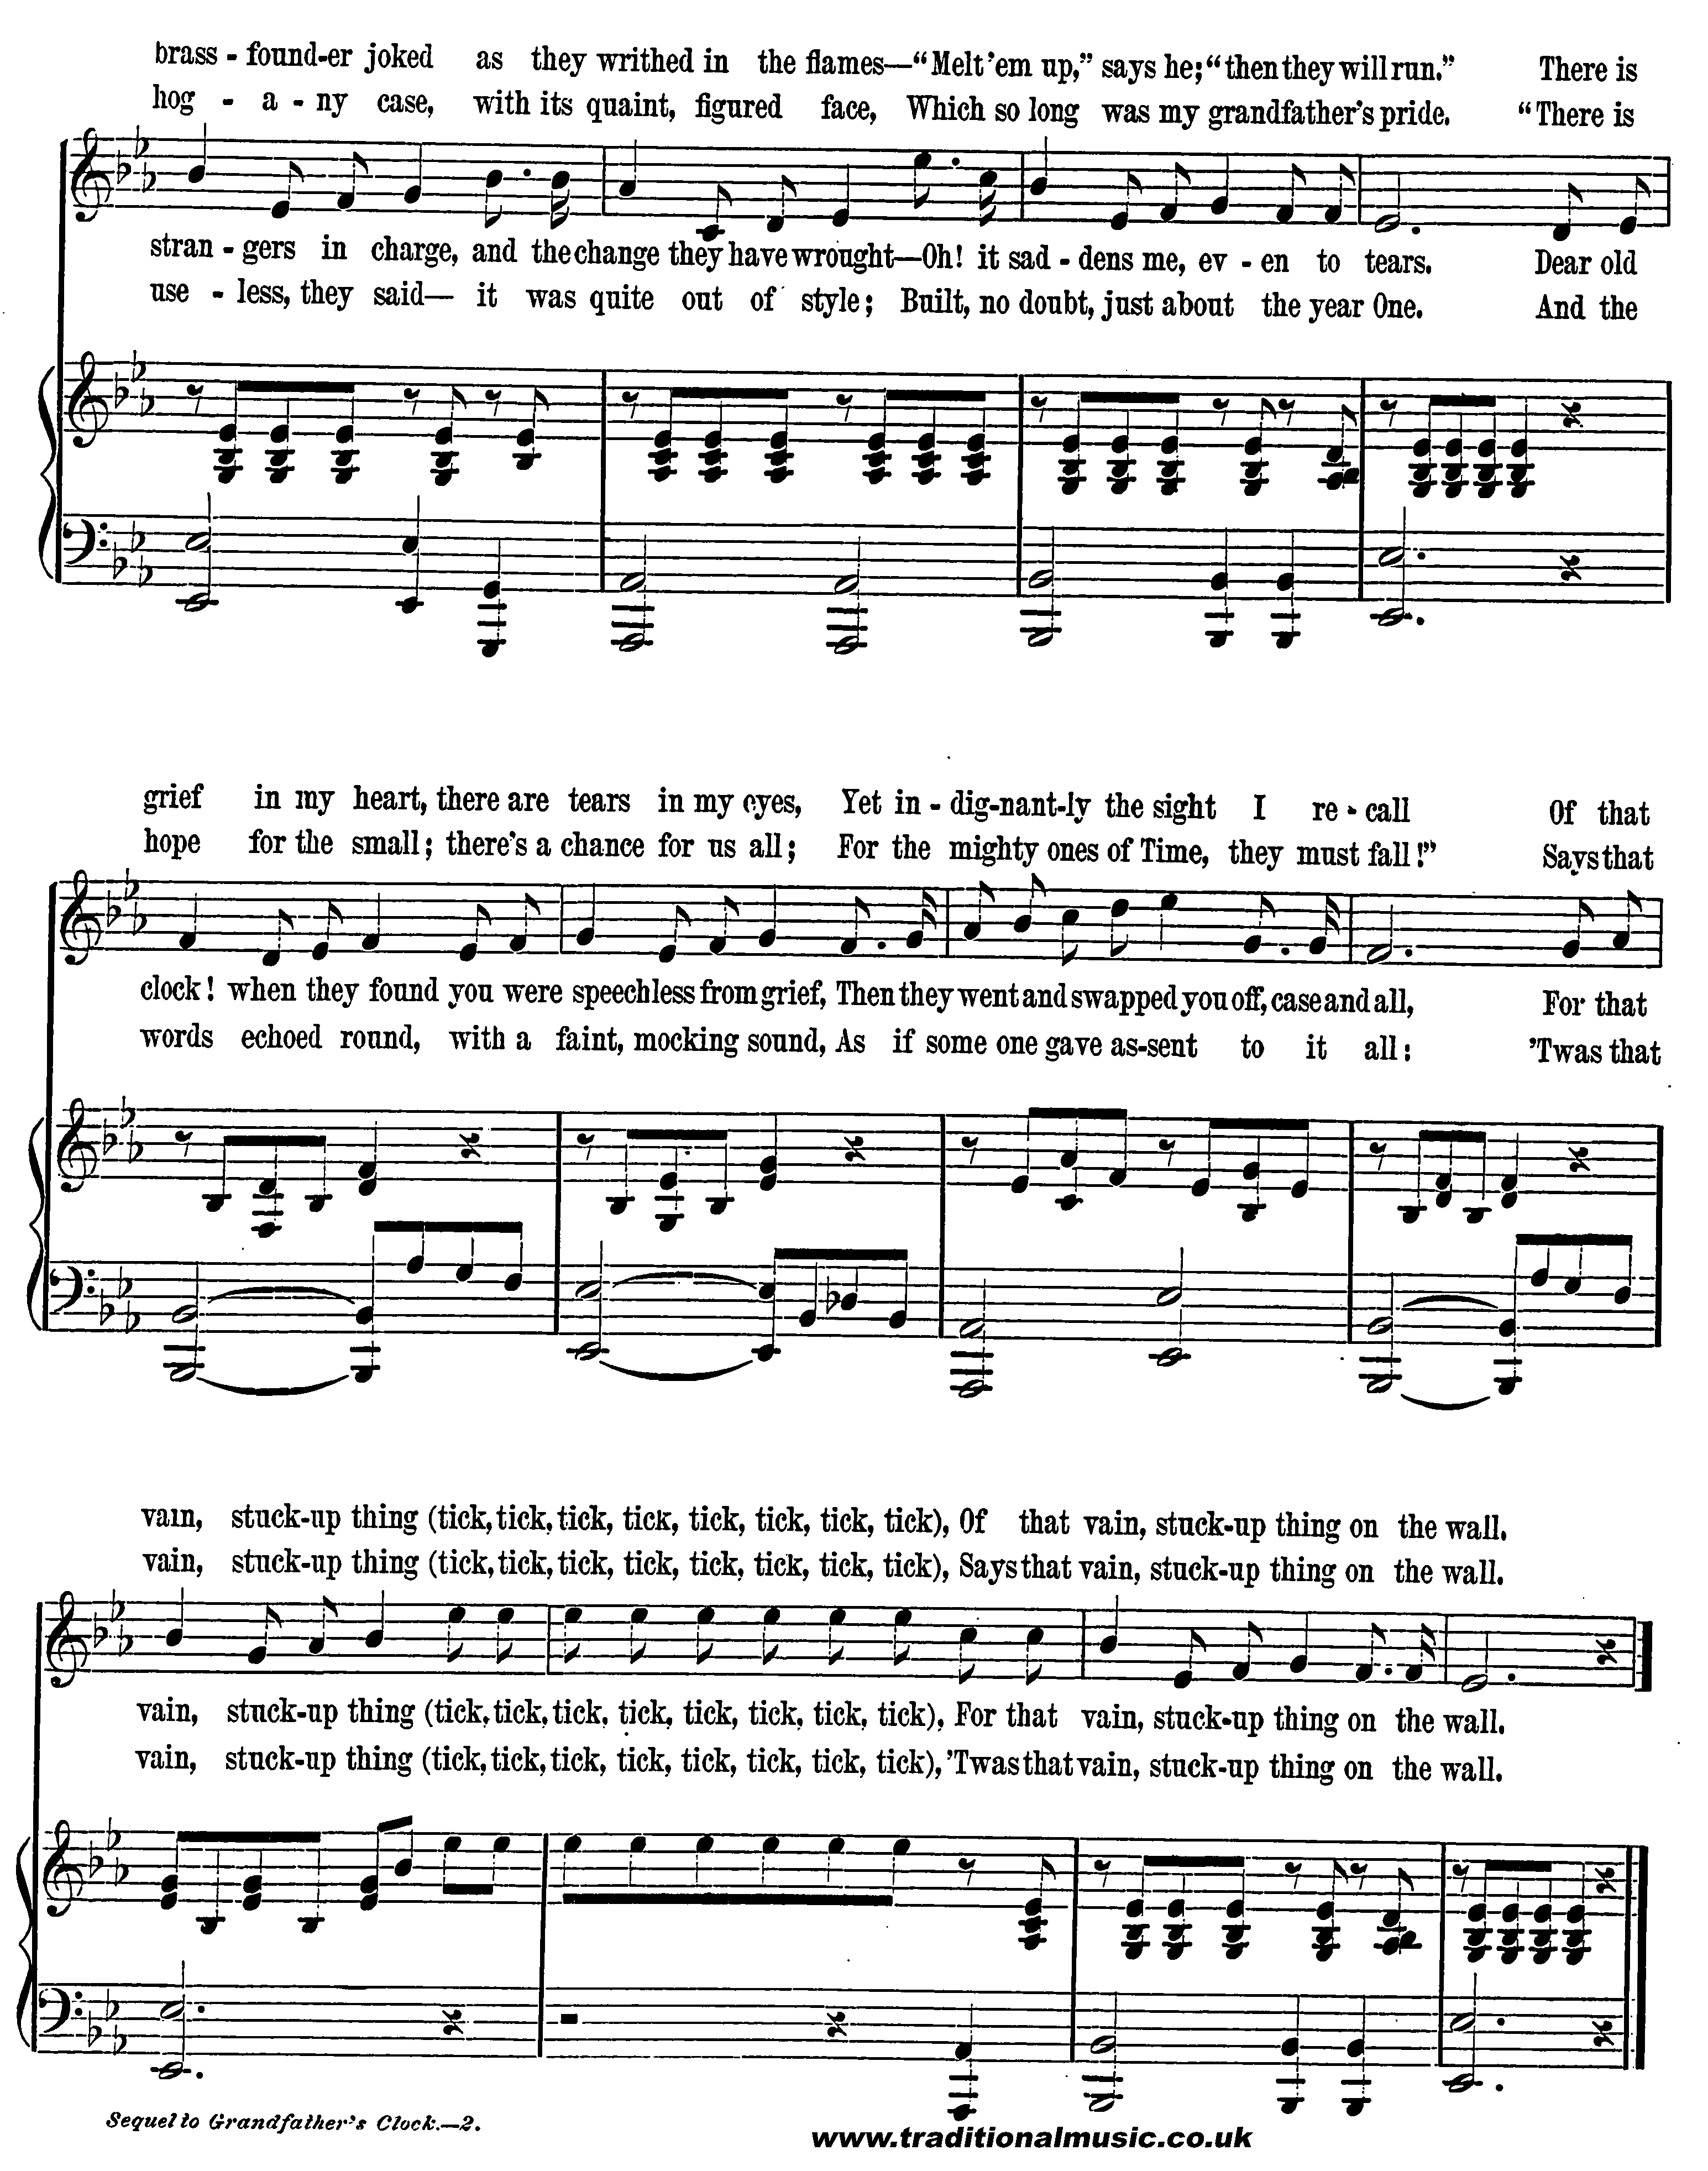 Grandfather's Clock Sequel, Sheet Music page 3